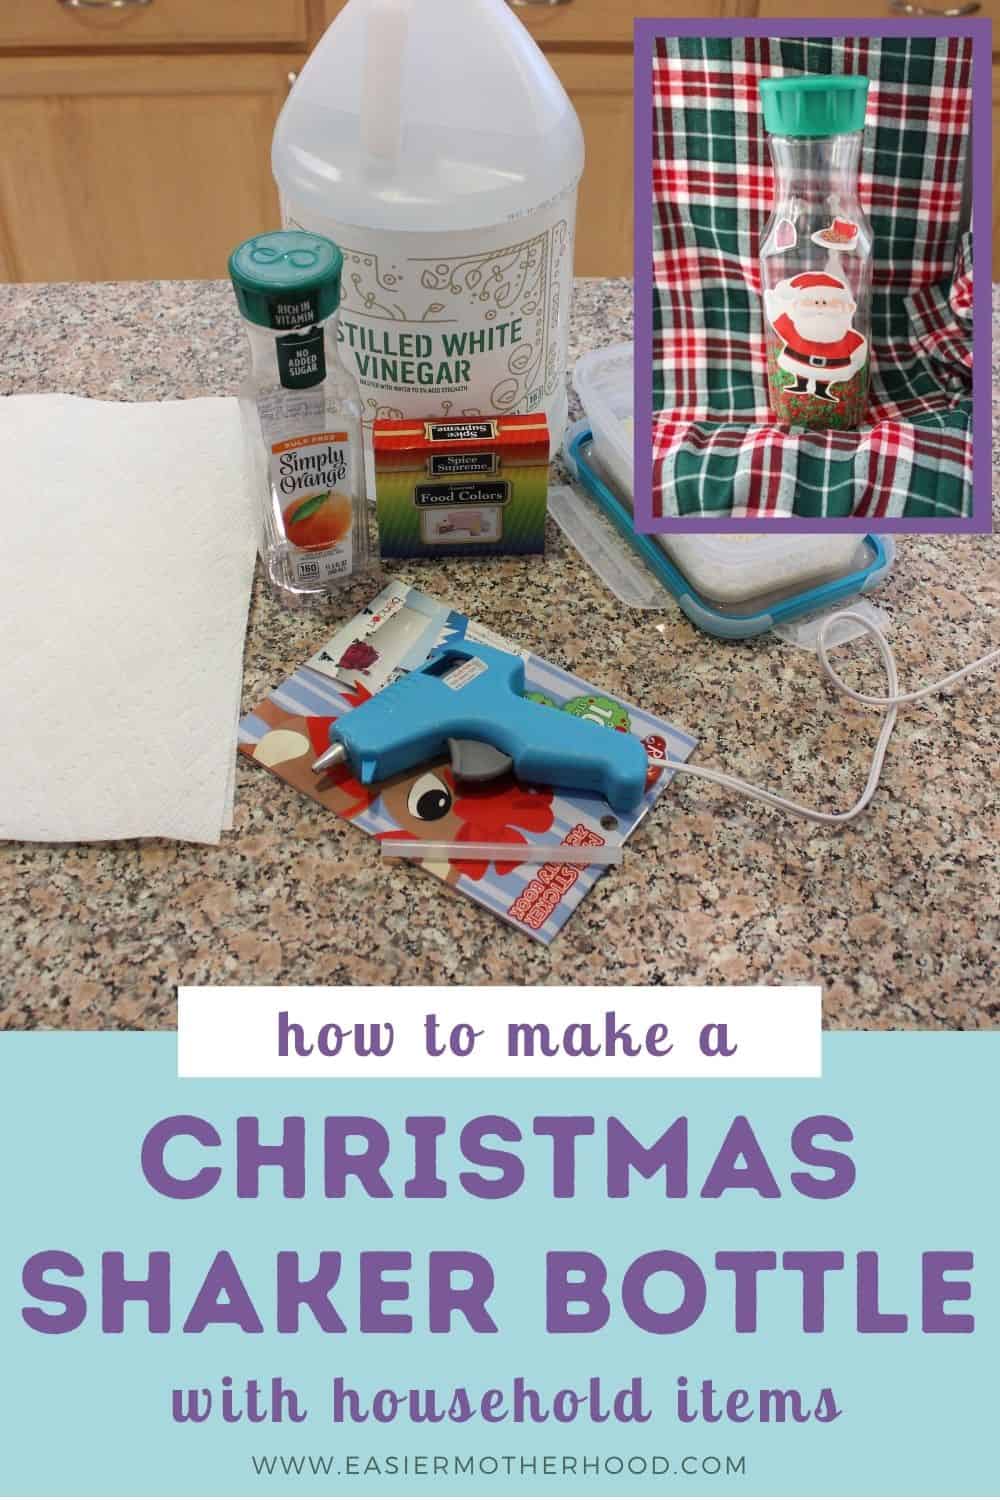 Main image is of supplies needed to make the craft with an inset photo of the finished sensory shaker. Text below image reads "how to make a christmas shaker bottle with household items".